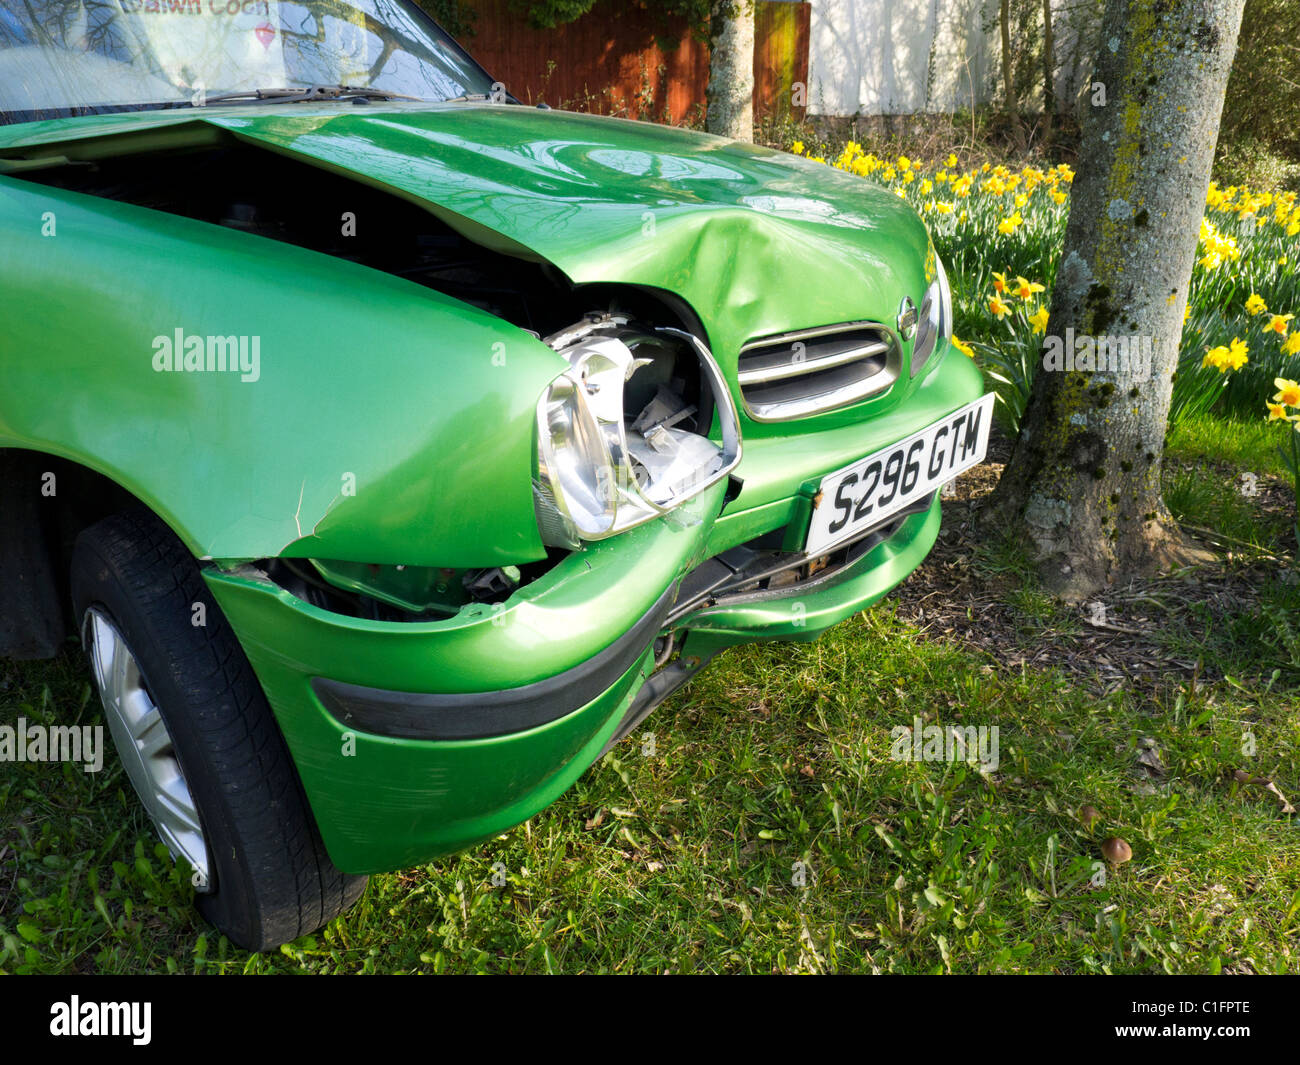 Small green Nissan Micra car after frontal crash into tree on rural country road Stock Photo